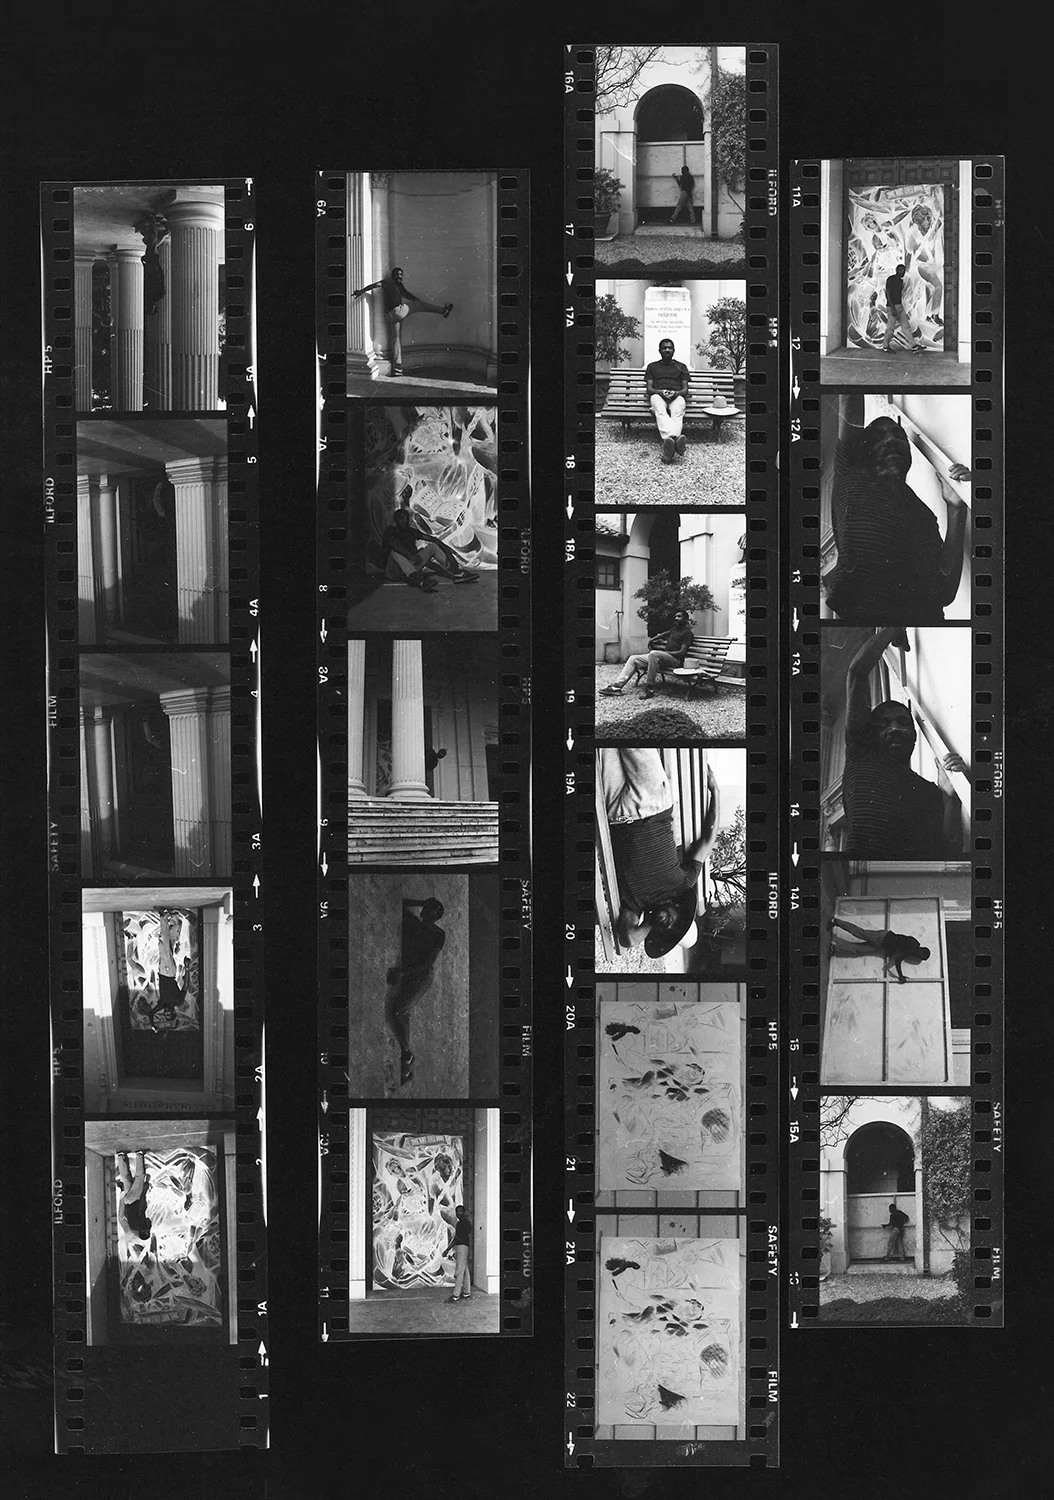 <p><span>Contact prints from Denzil Forrester’s time in Rome (1984).</span></p>